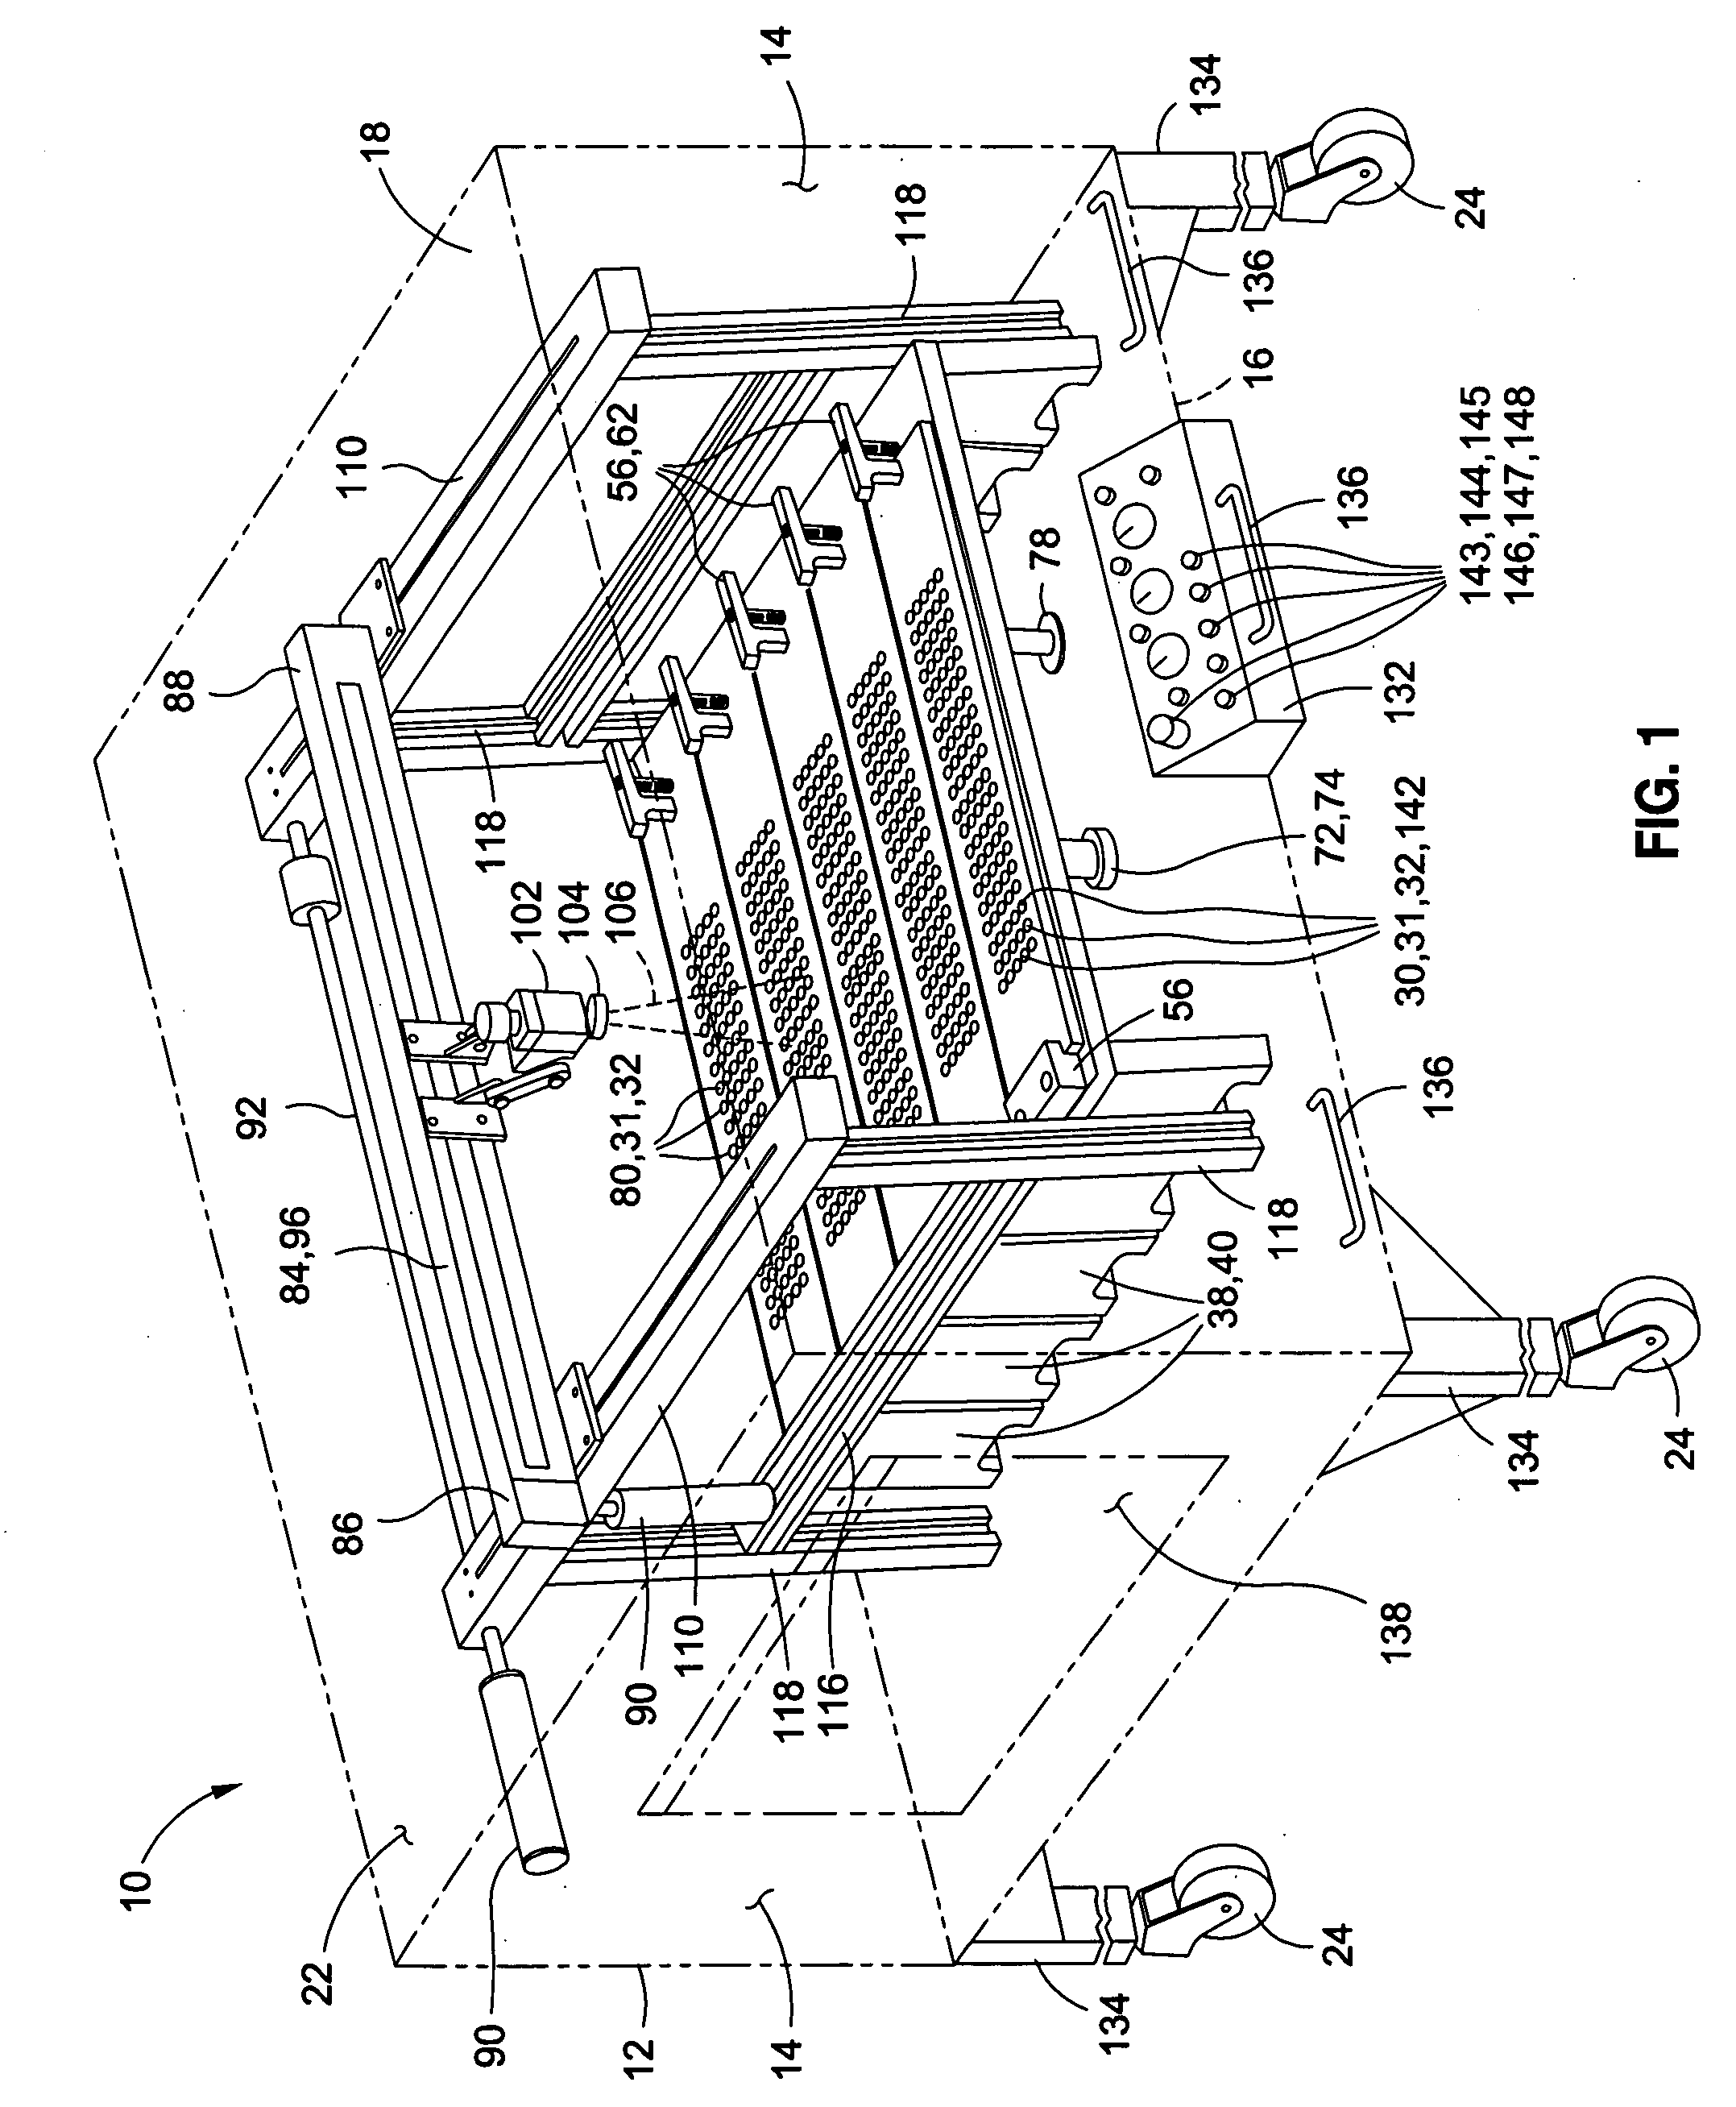 Controlled environment fastener head painting device and method